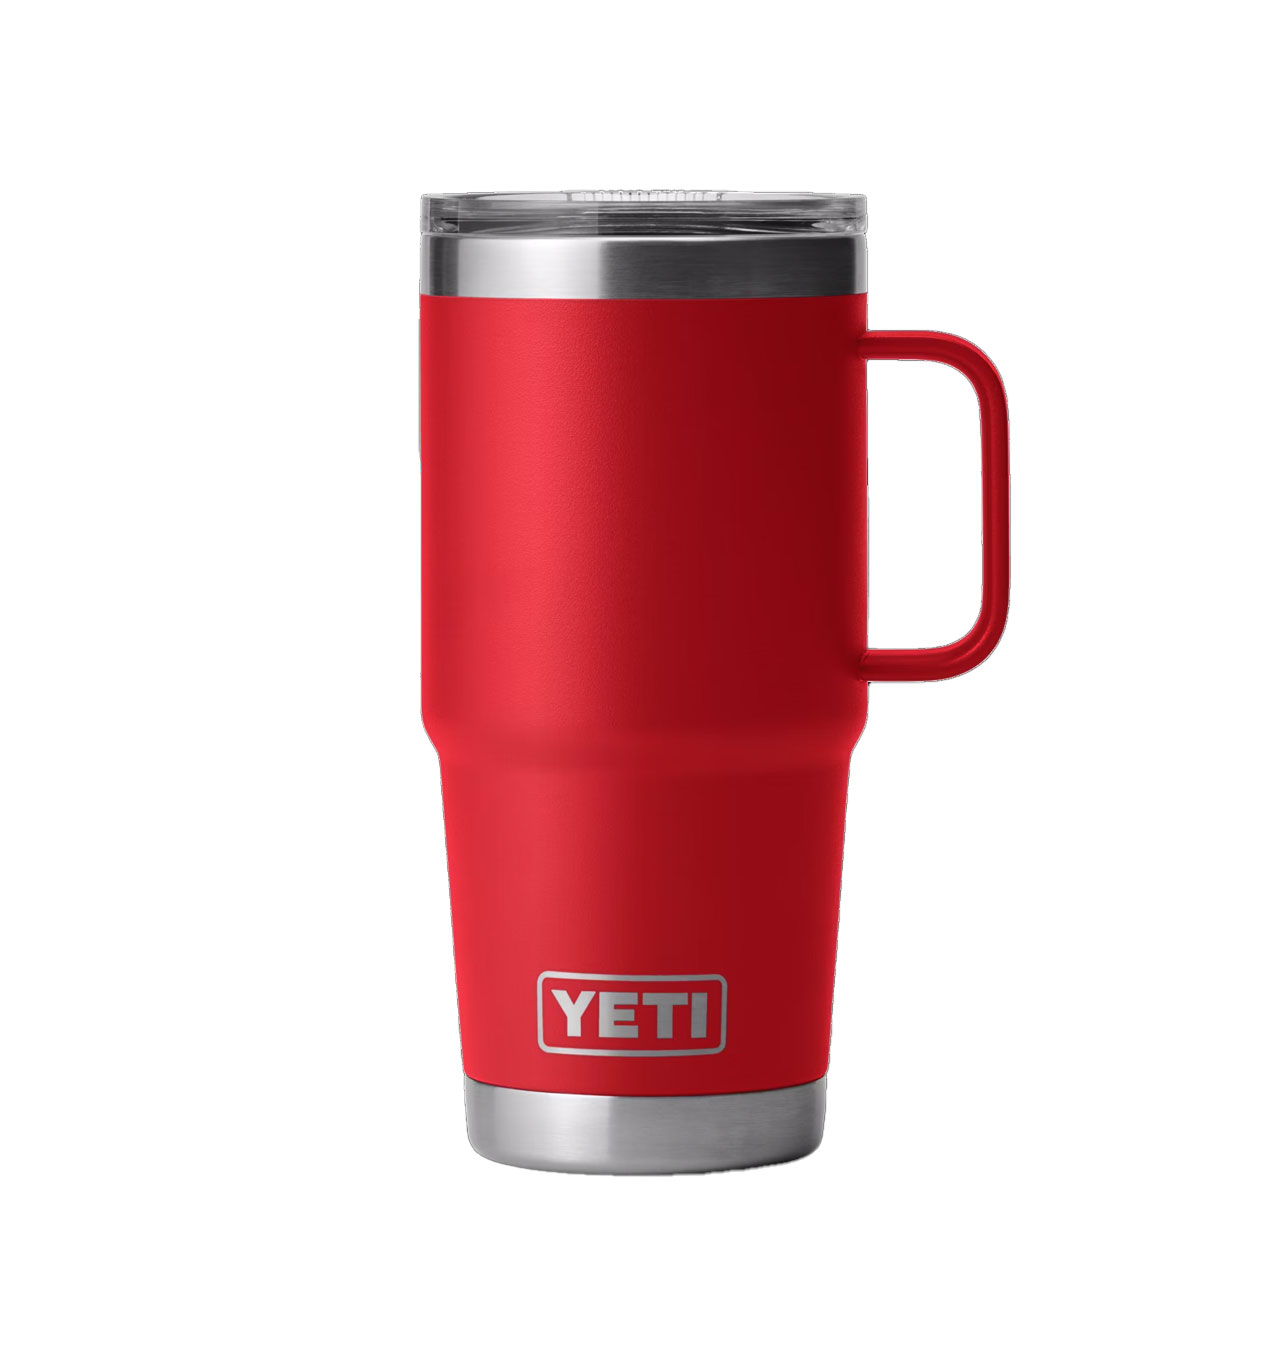 Yeti---Rambler-20-oz-Travel-Mug-with-Stronghold-Lid---Rescue-Red12